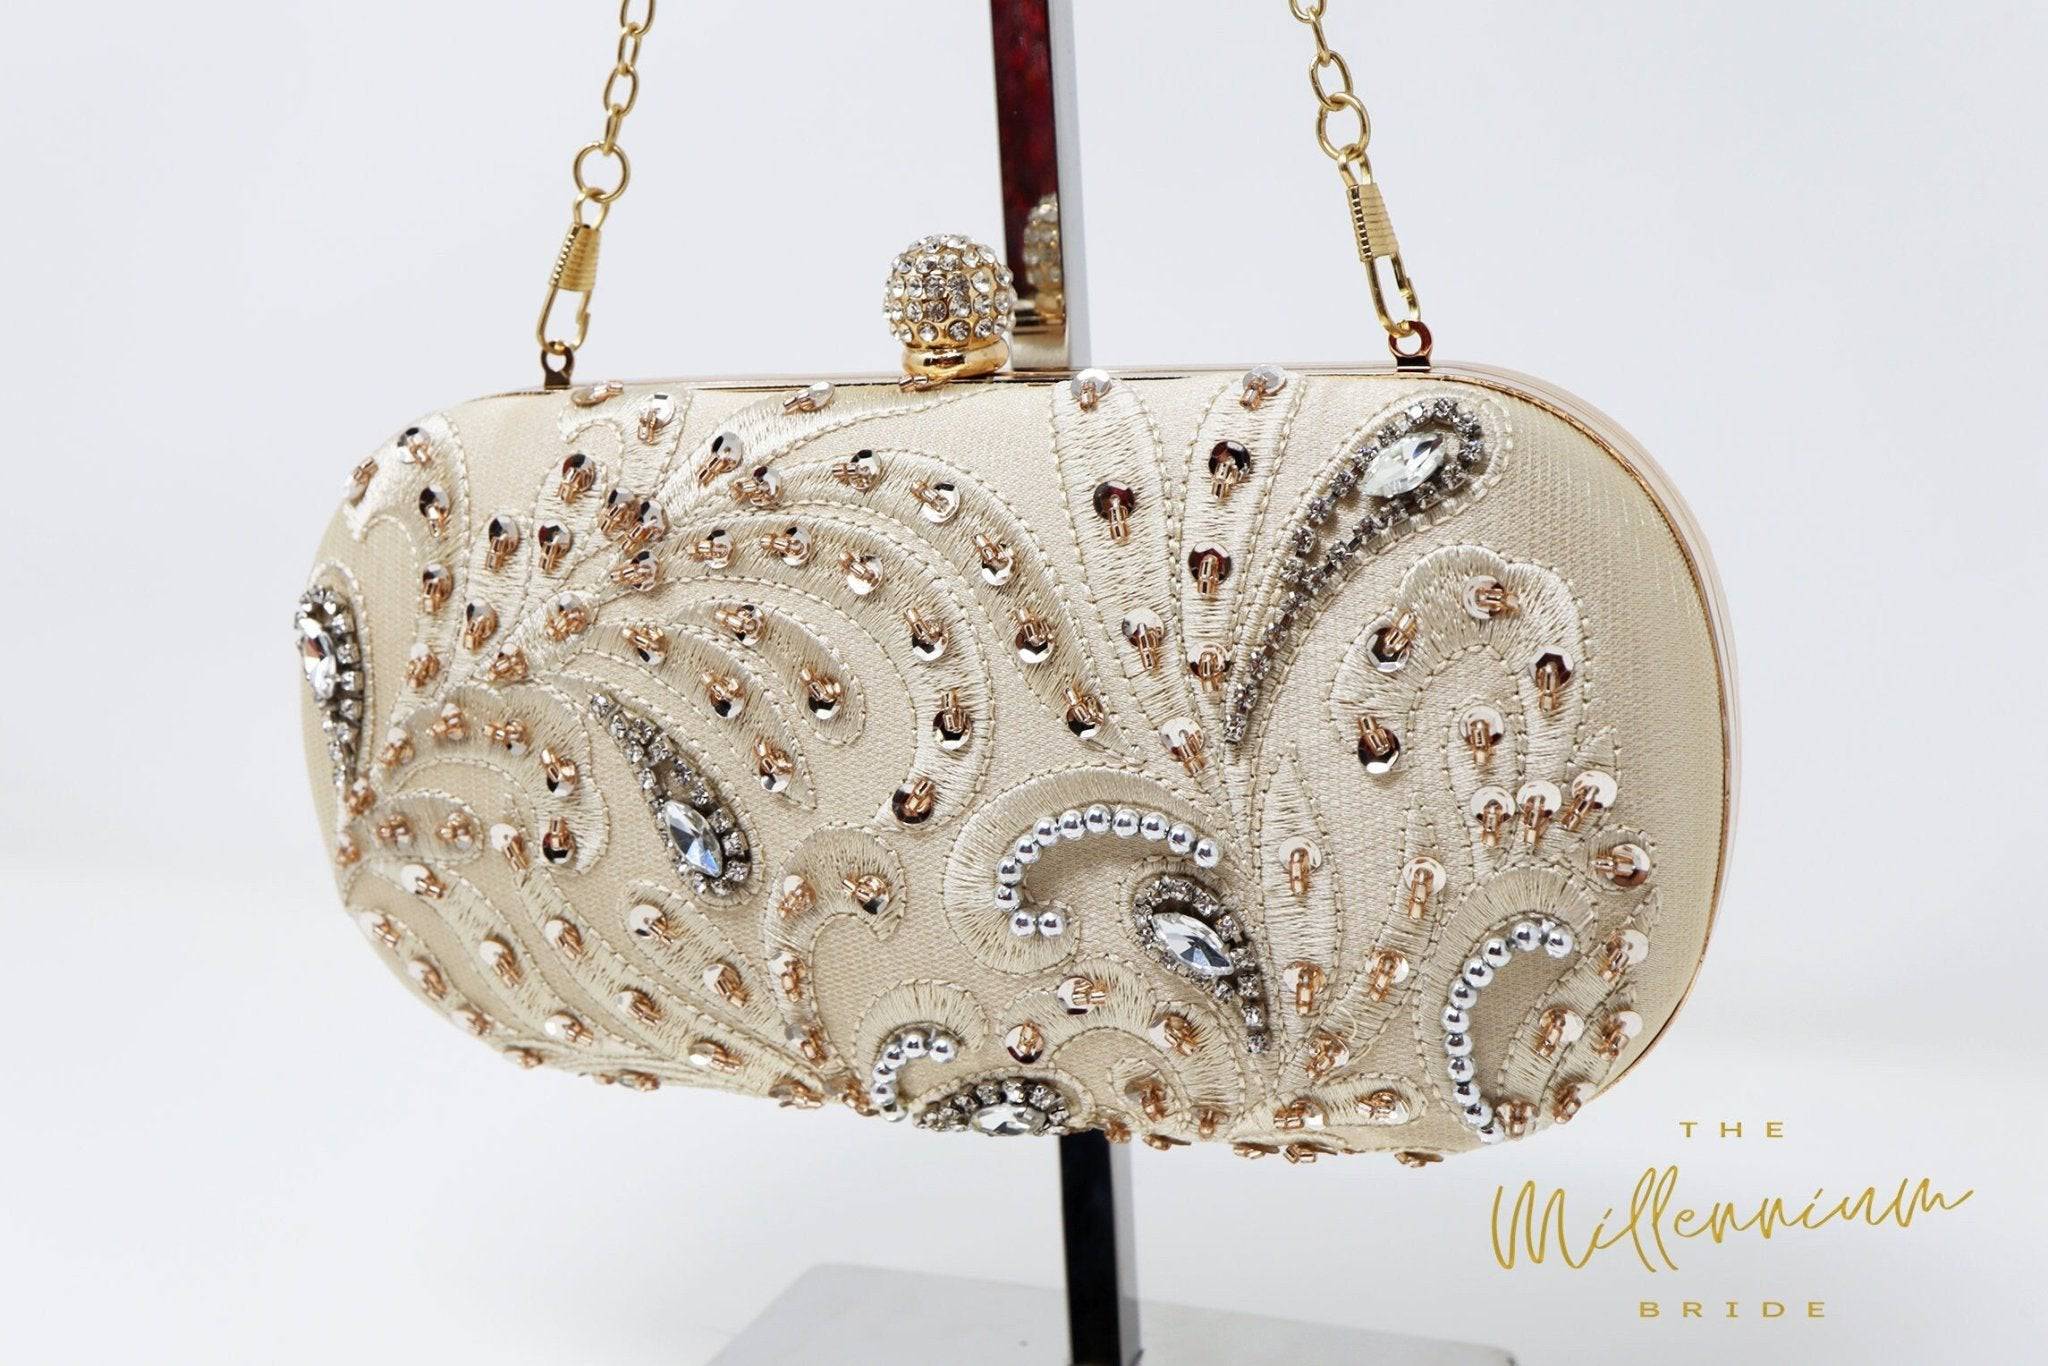 Female Golden and Silver Ladies Wedding Clutch Bag, Size: 5 X 8 X 4 Inch (  L X H X W ) at Rs 340/piece in New Delhi